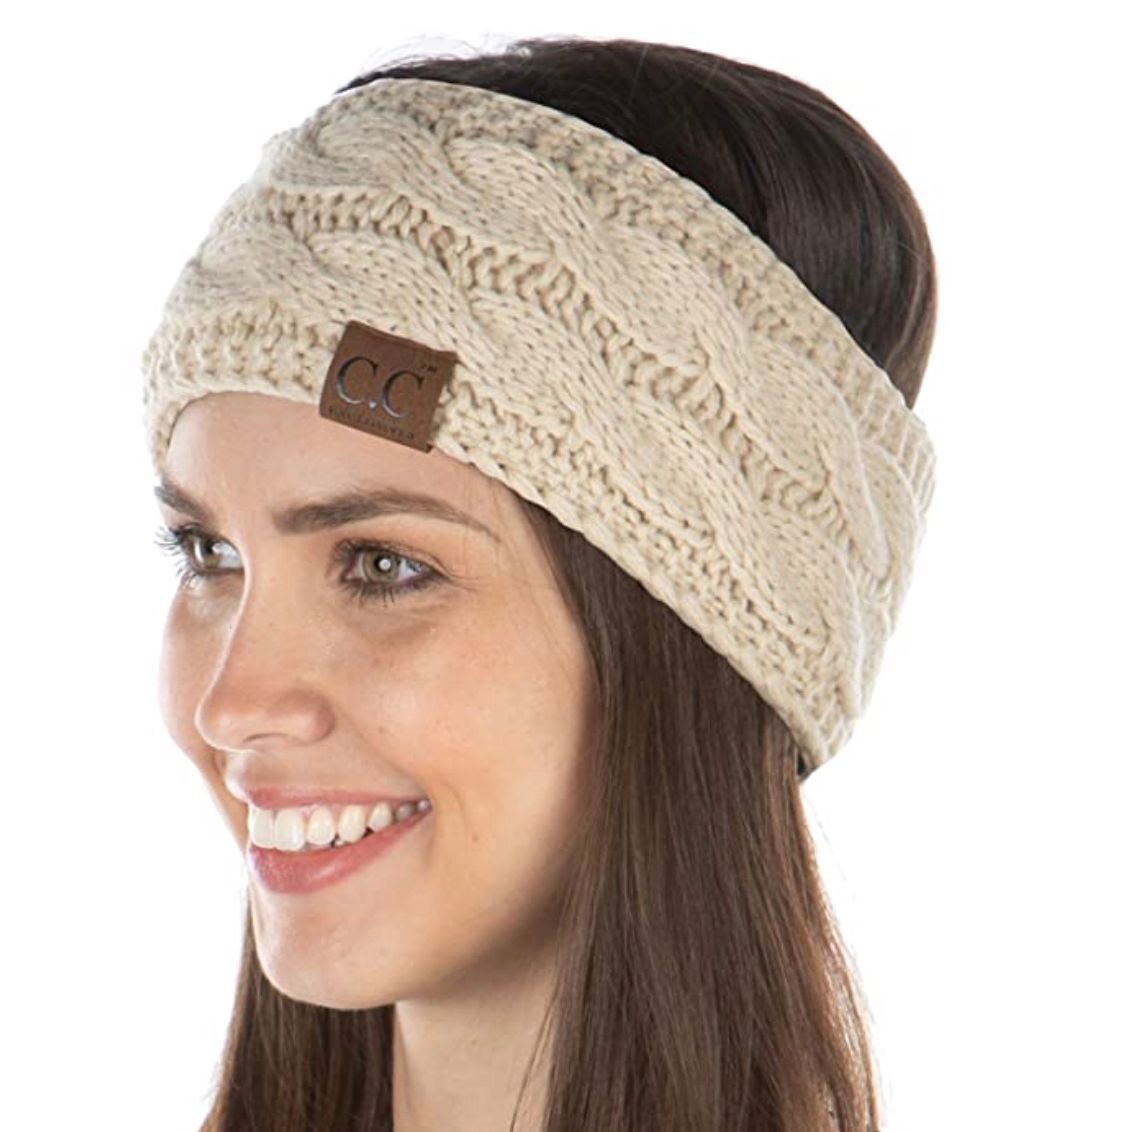 GG Headband Double G Design One Size Fits 100%NEW HOT 